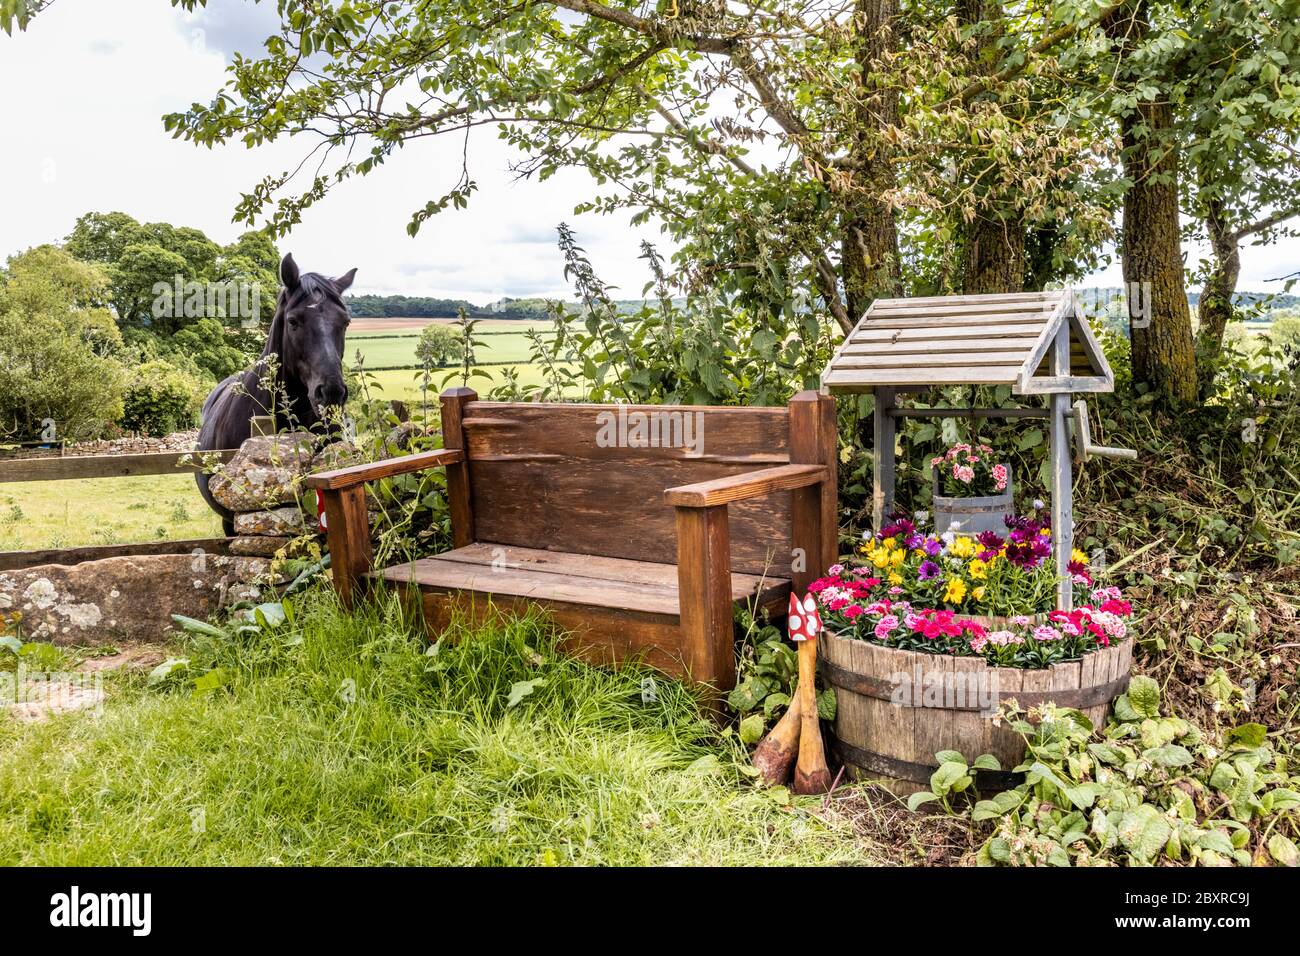 A horse admiring the floral 'wishing well' in the Cotswold hamlet of Taddington, Gloucestershire UK Stock Photo